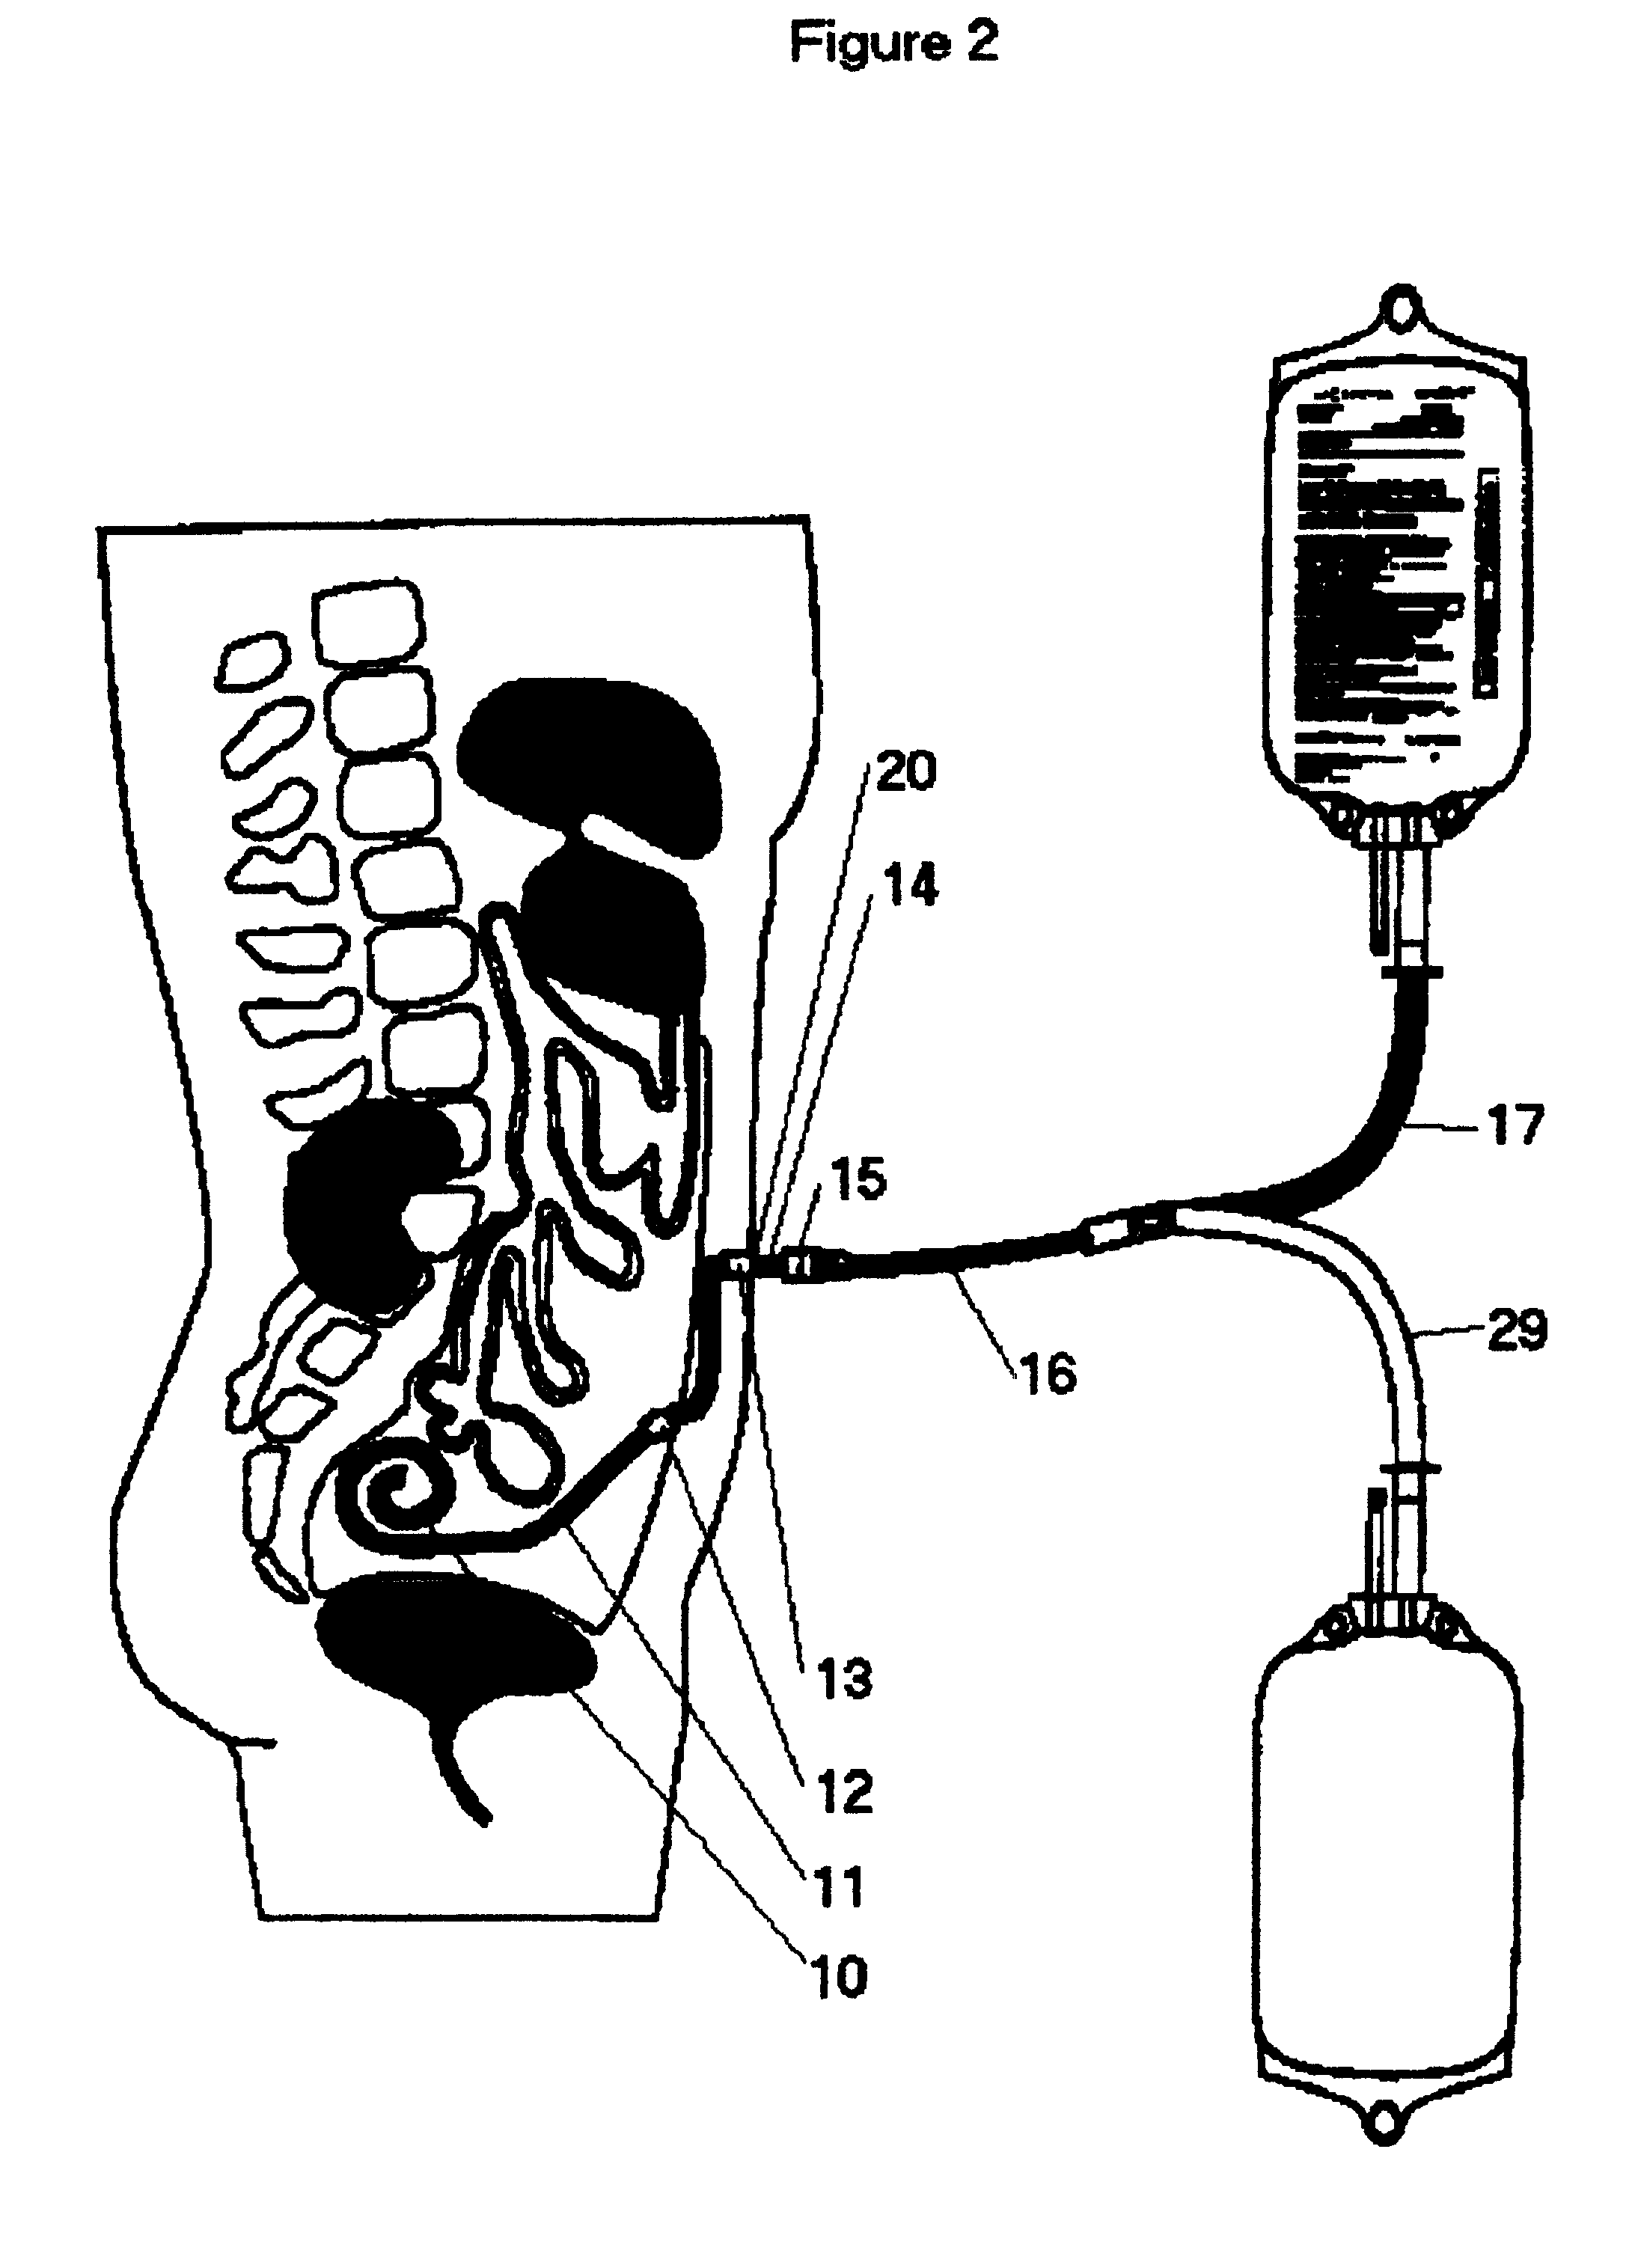 Garment for securing and exposing a peritoneal dialysis catheter and catheter exit site